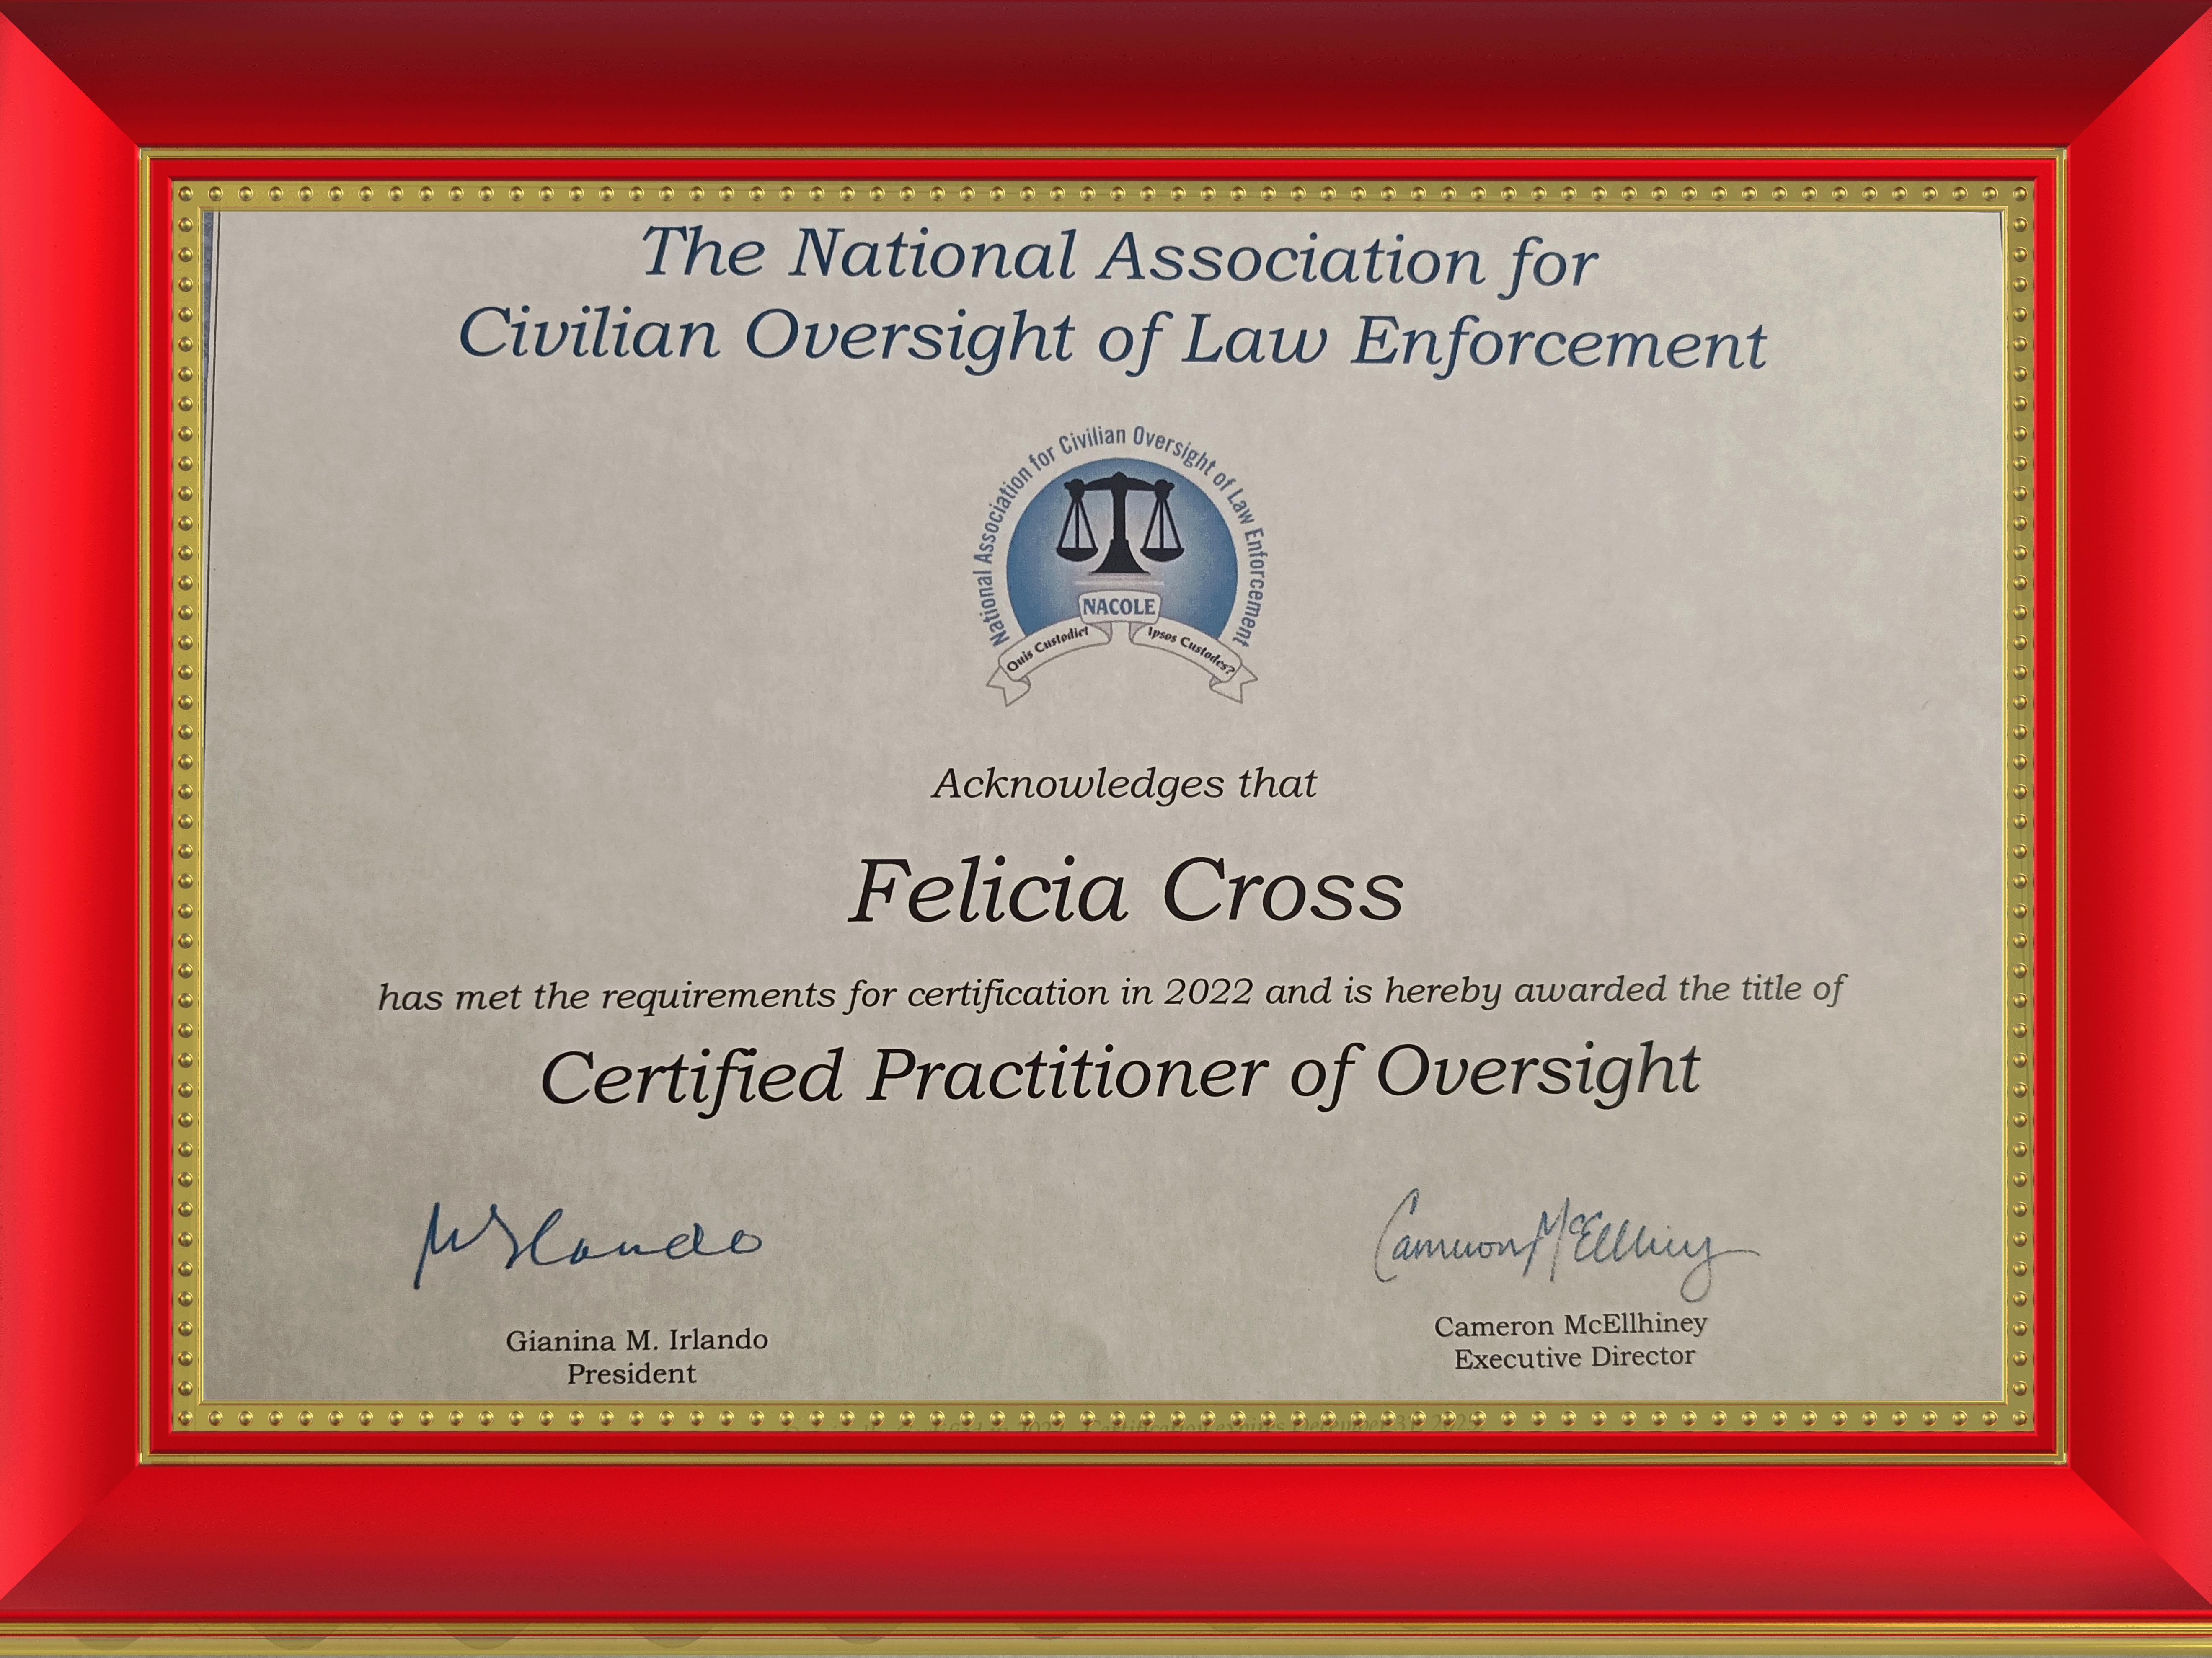 Certificate from National Association of Civilian Oversight of Law Enforcement: Felicia Cross Certified Practitioner of Oversight